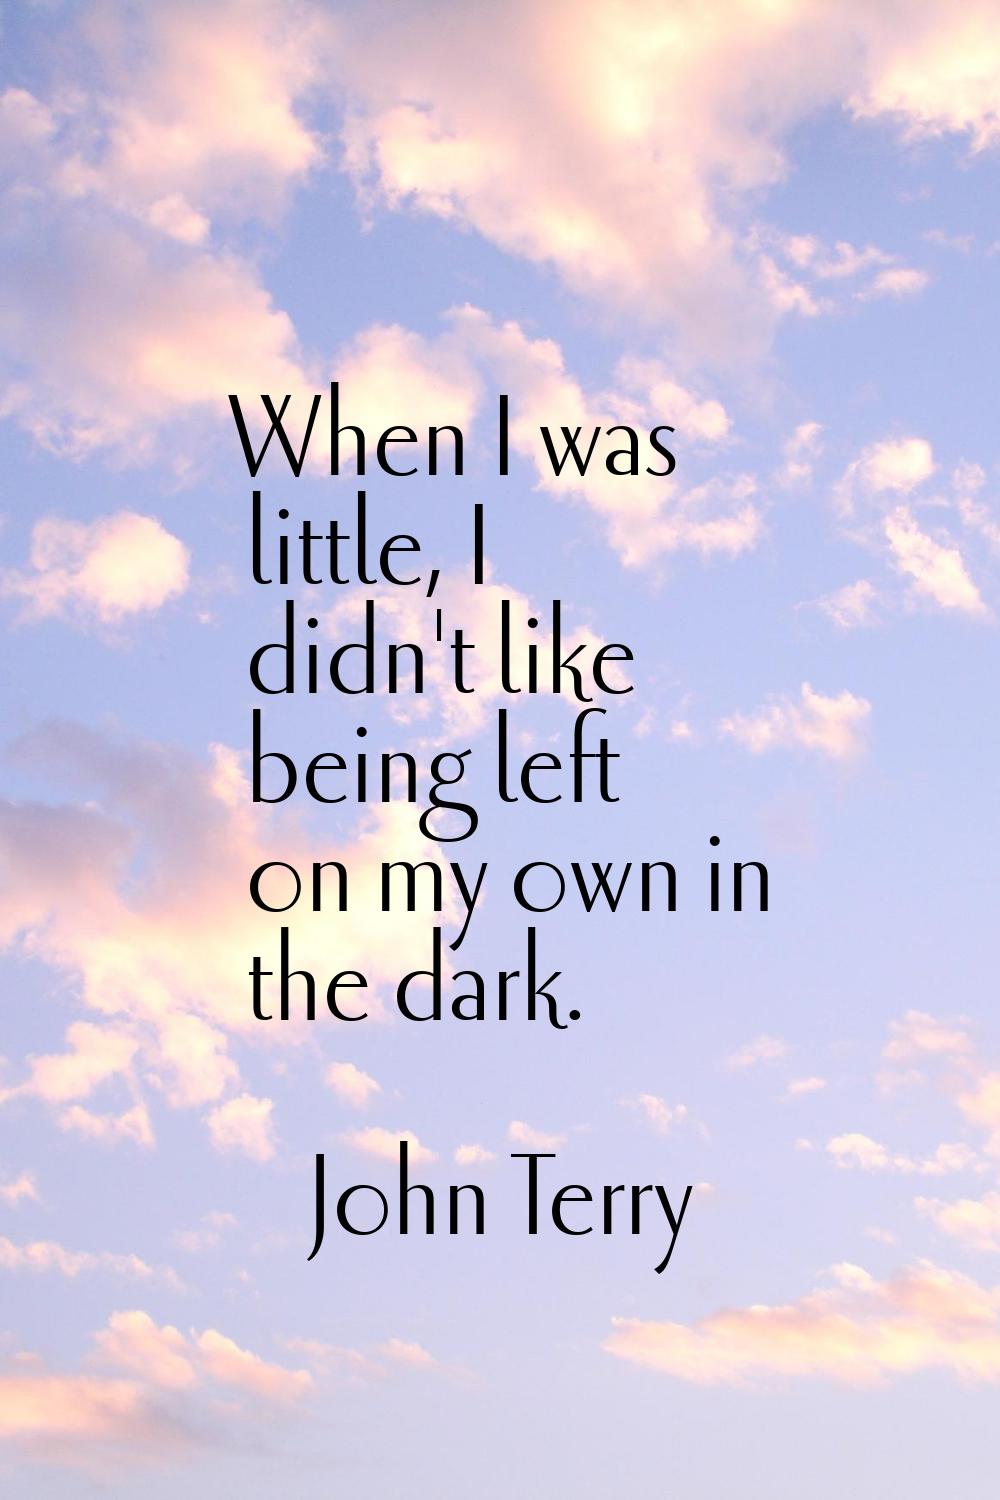 When I was little, I didn't like being left on my own in the dark.